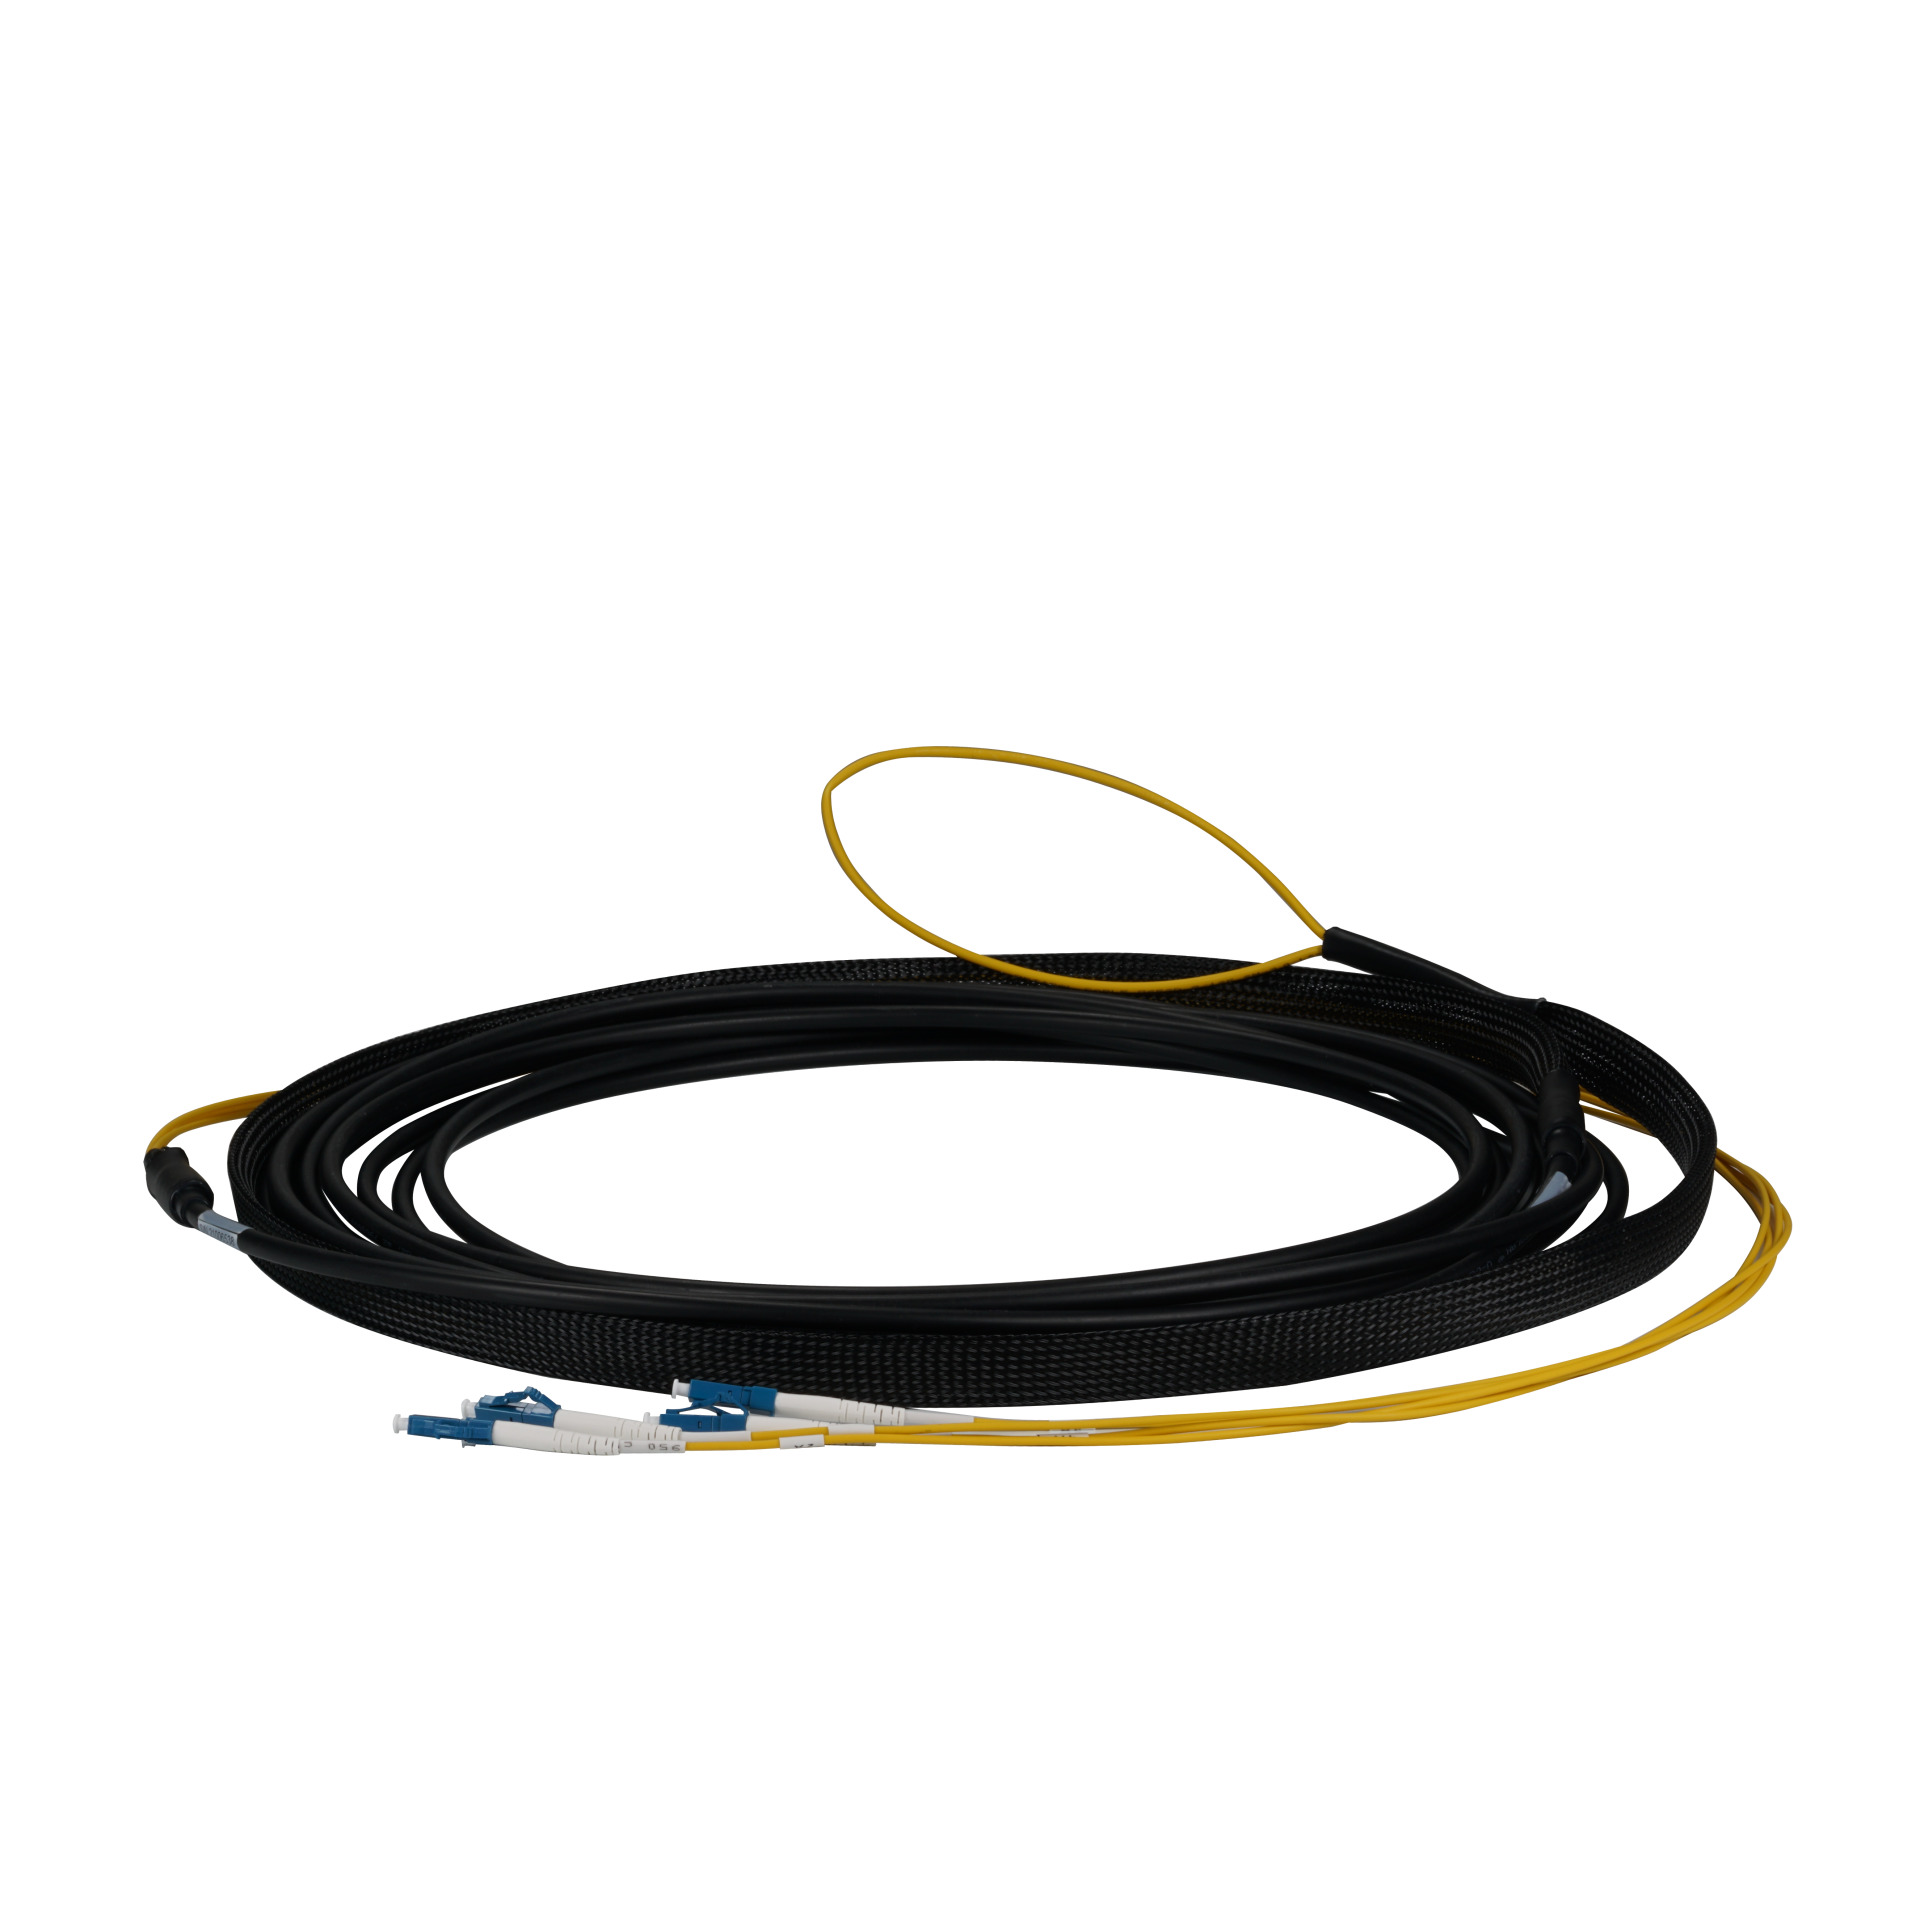 Trunk cable U-DQ(ZN)BH 12E 9/125, LC/LC OS2 200m